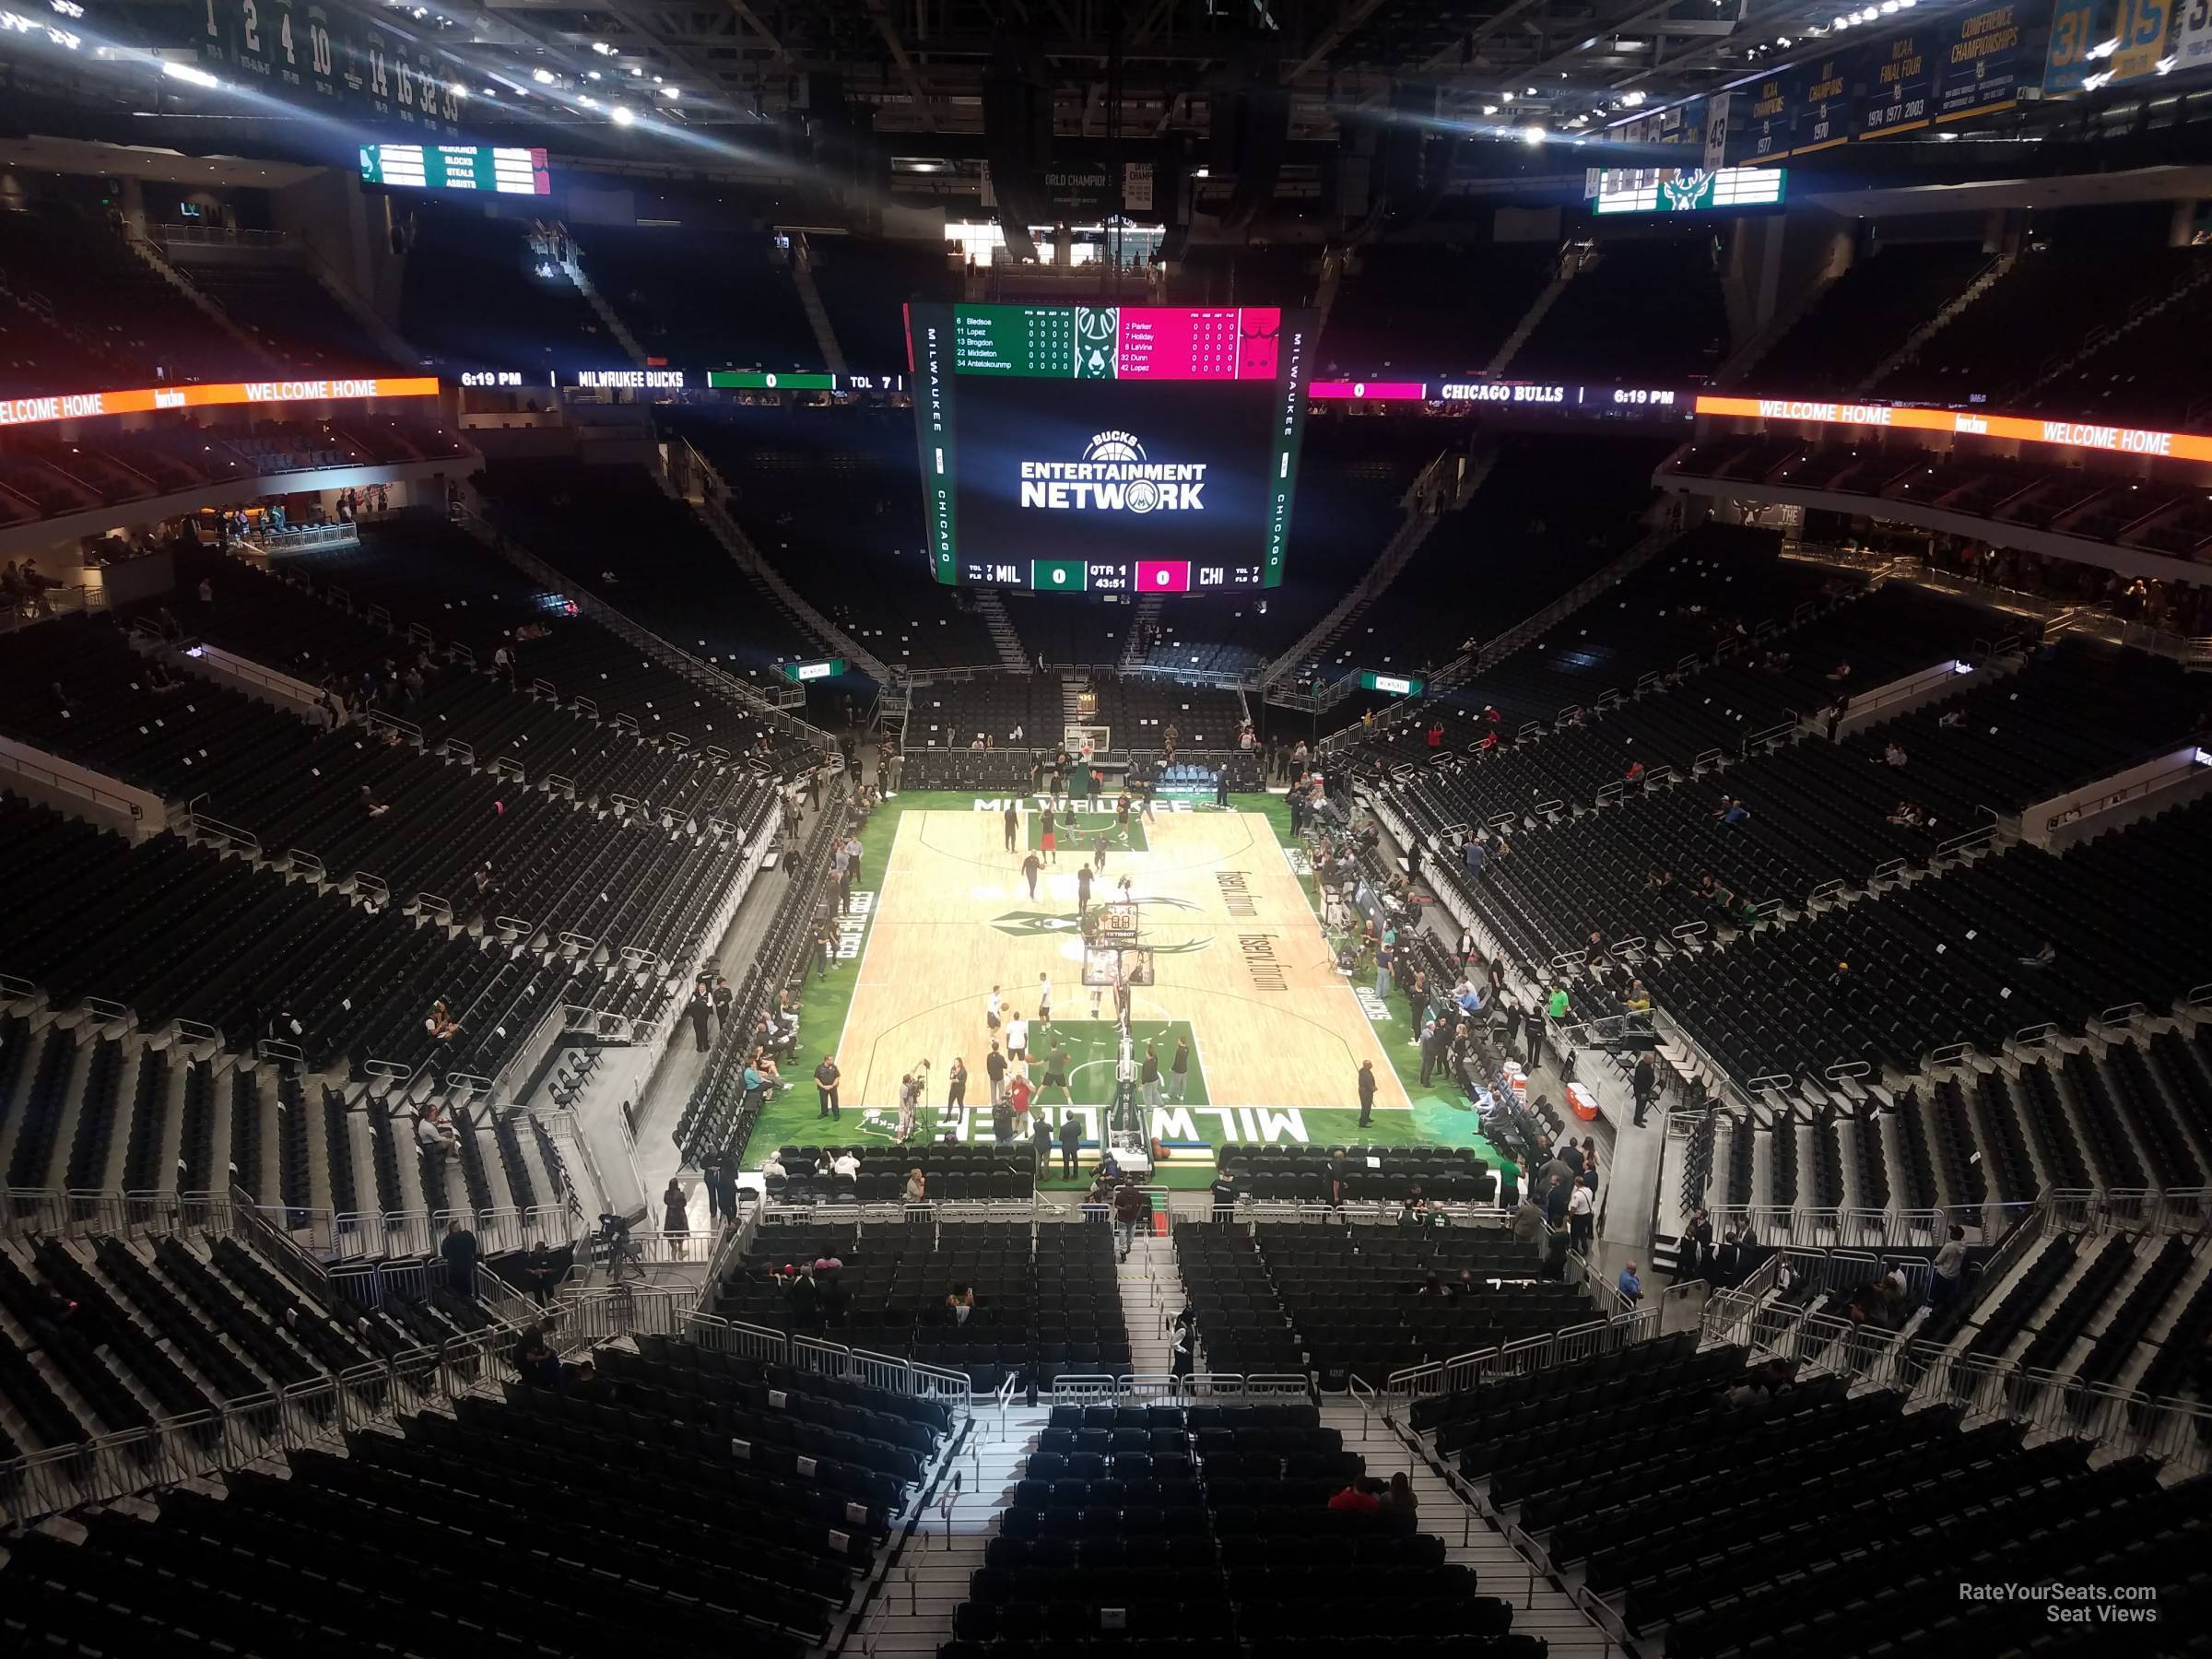 section 201, row 3 seat view  for basketball - fiserv forum